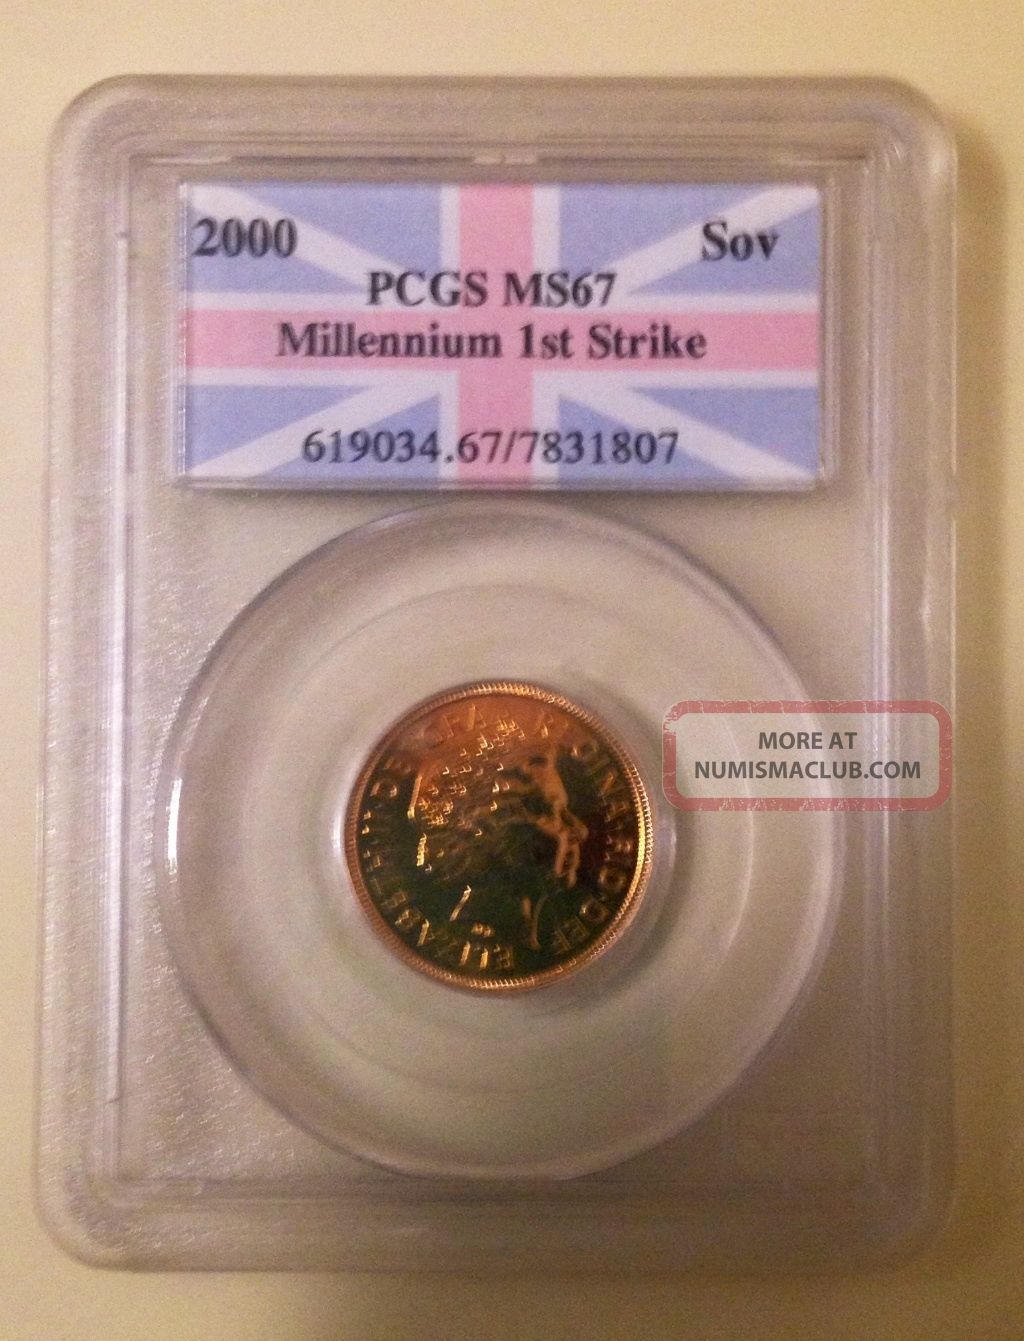 2000 Great Britain Gold Sovereign Pcgs Ms67 Millennium 1st Strike Coin Gold photo